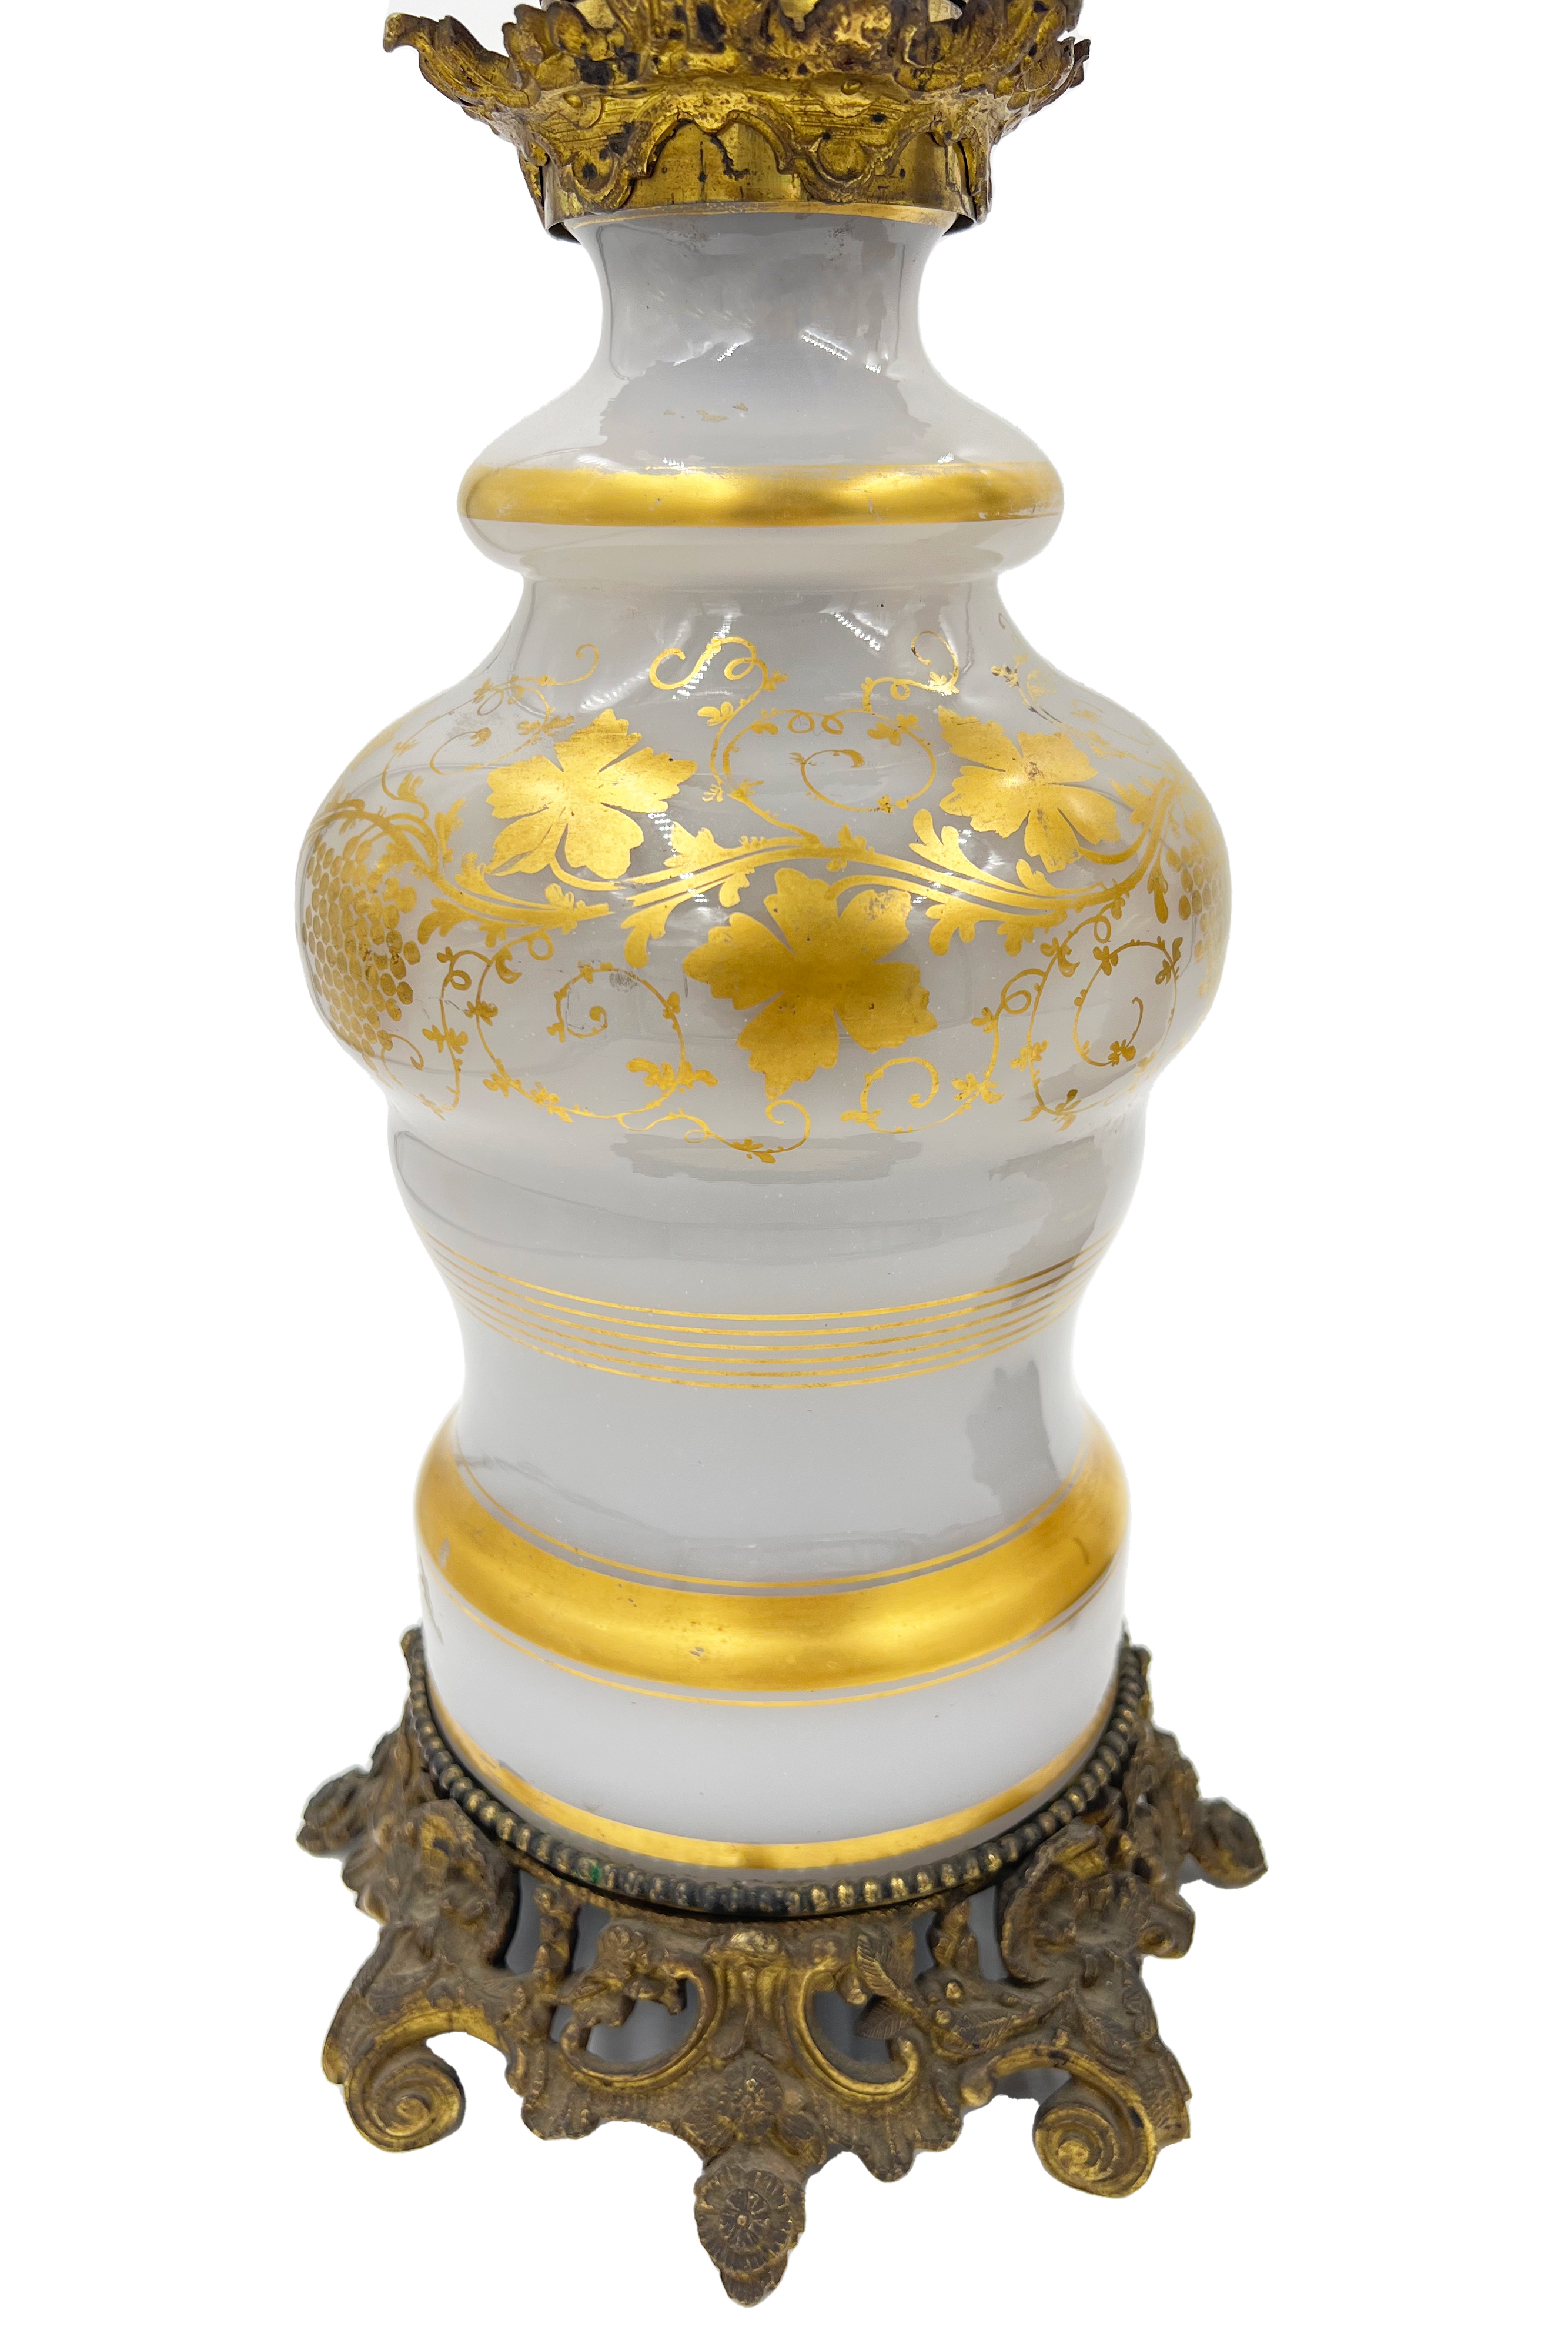 PAIR OF FRENCH GLASS OPALINE OIL LAMPS - Image 3 of 3